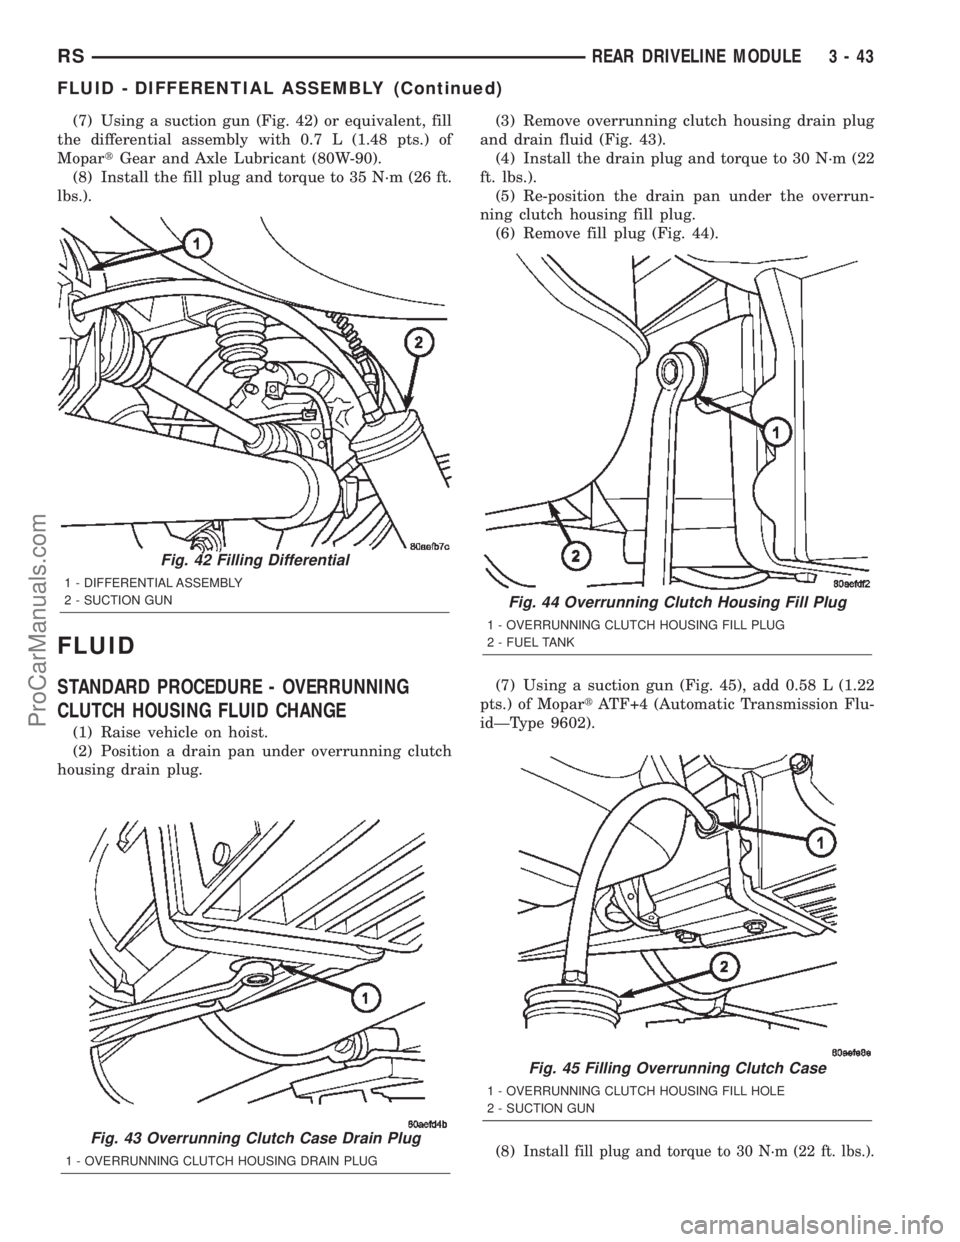 CHRYSLER TOWN AND COUNTRY 2002  Service Manual (7) Using a suction gun (Fig. 42) or equivalent, fill
the differential assembly with 0.7 L (1.48 pts.) of
MopartGear and Axle Lubricant (80W-90).
(8) Install the fill plug and torque to 35 N´m (26 ft